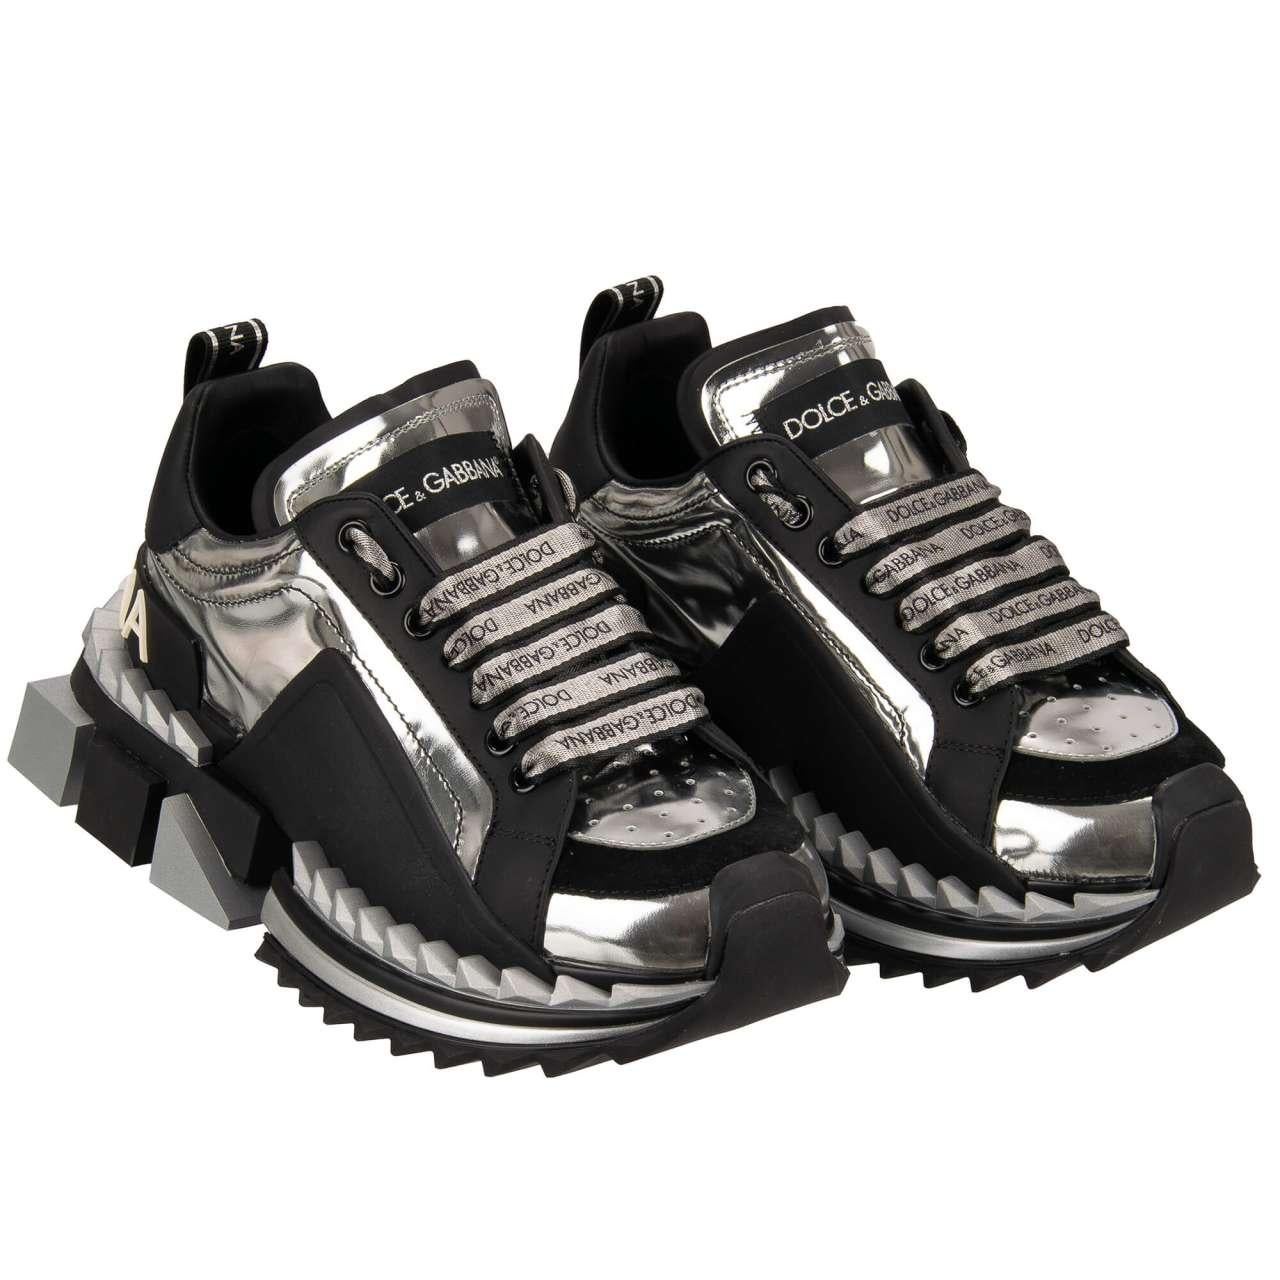 - Lace Sneaker SUPER QUEEN with plateau and DG logo in silver and black by DOLCE & GABBANA - New with Box - MADE IN ITALY - Former RRP: EUR 895 - Model: CK1649-AK337-8B808 - Material: 66% Rubber, 44% Calf leather - Sole: Rubber - Color: Silver /